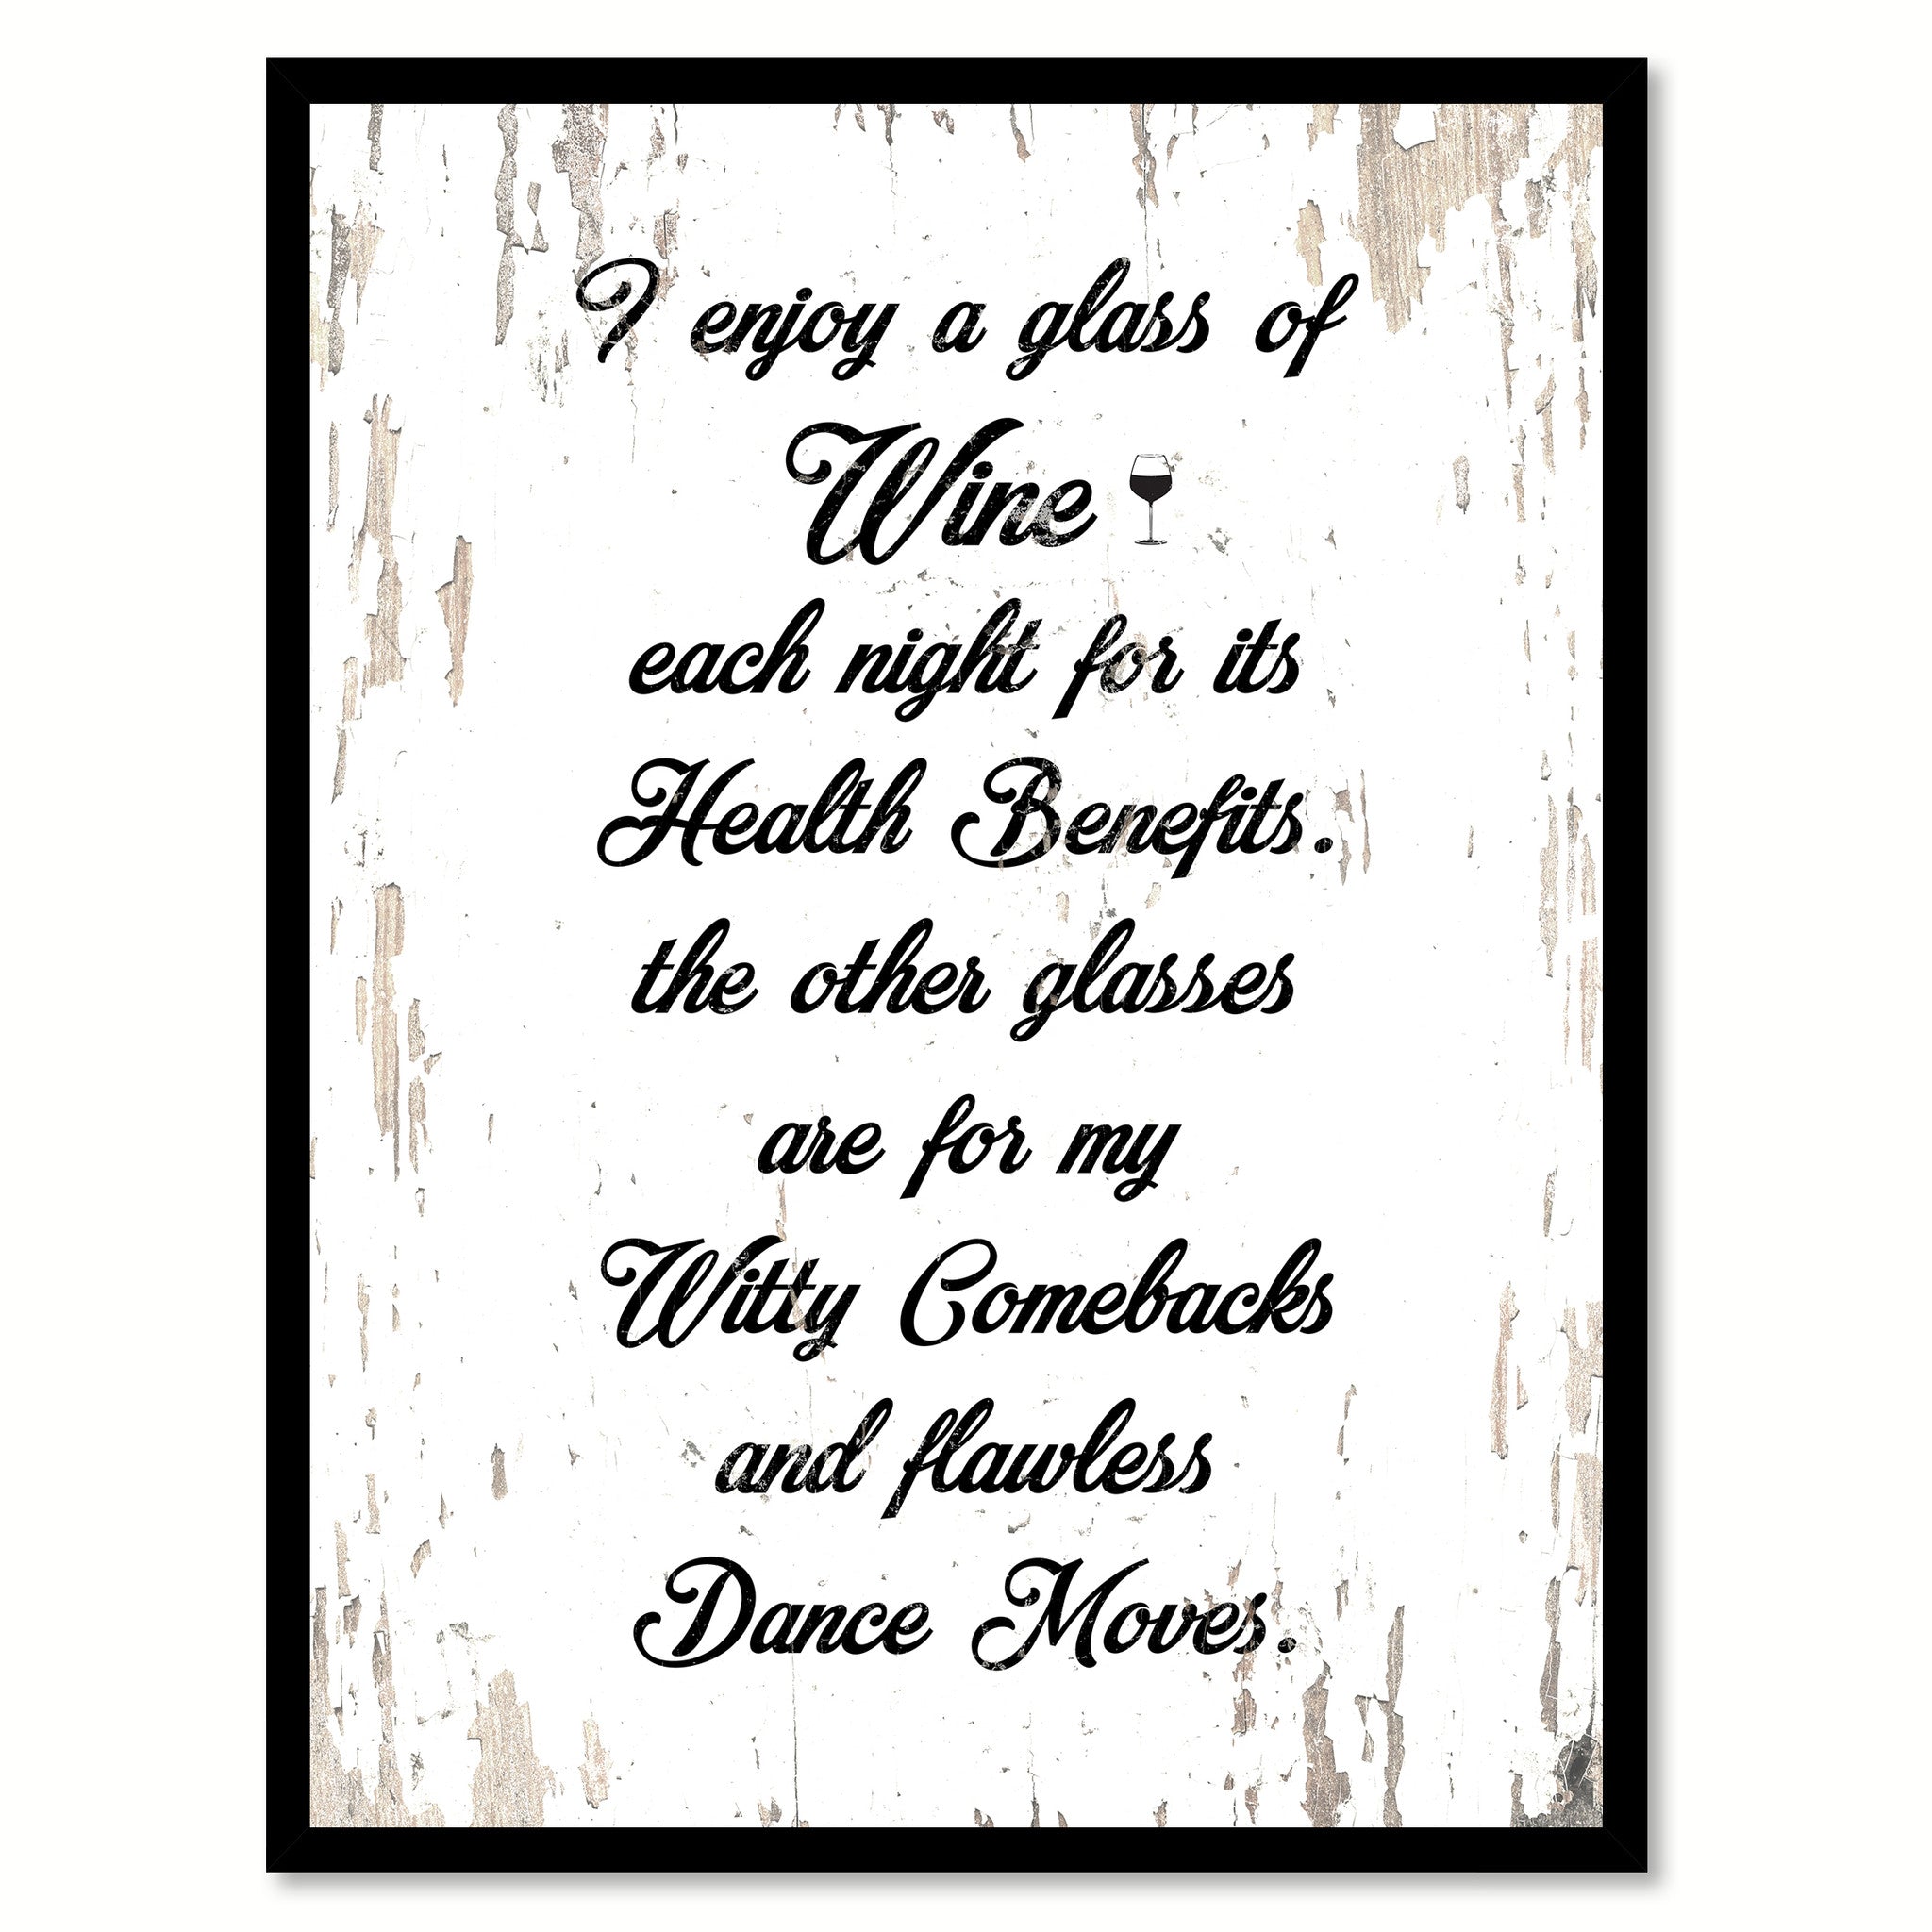 I Enjoy a Glass of Wine Each Night For Its Health Benefits Quote Saying Canvas Print with Picture Frame